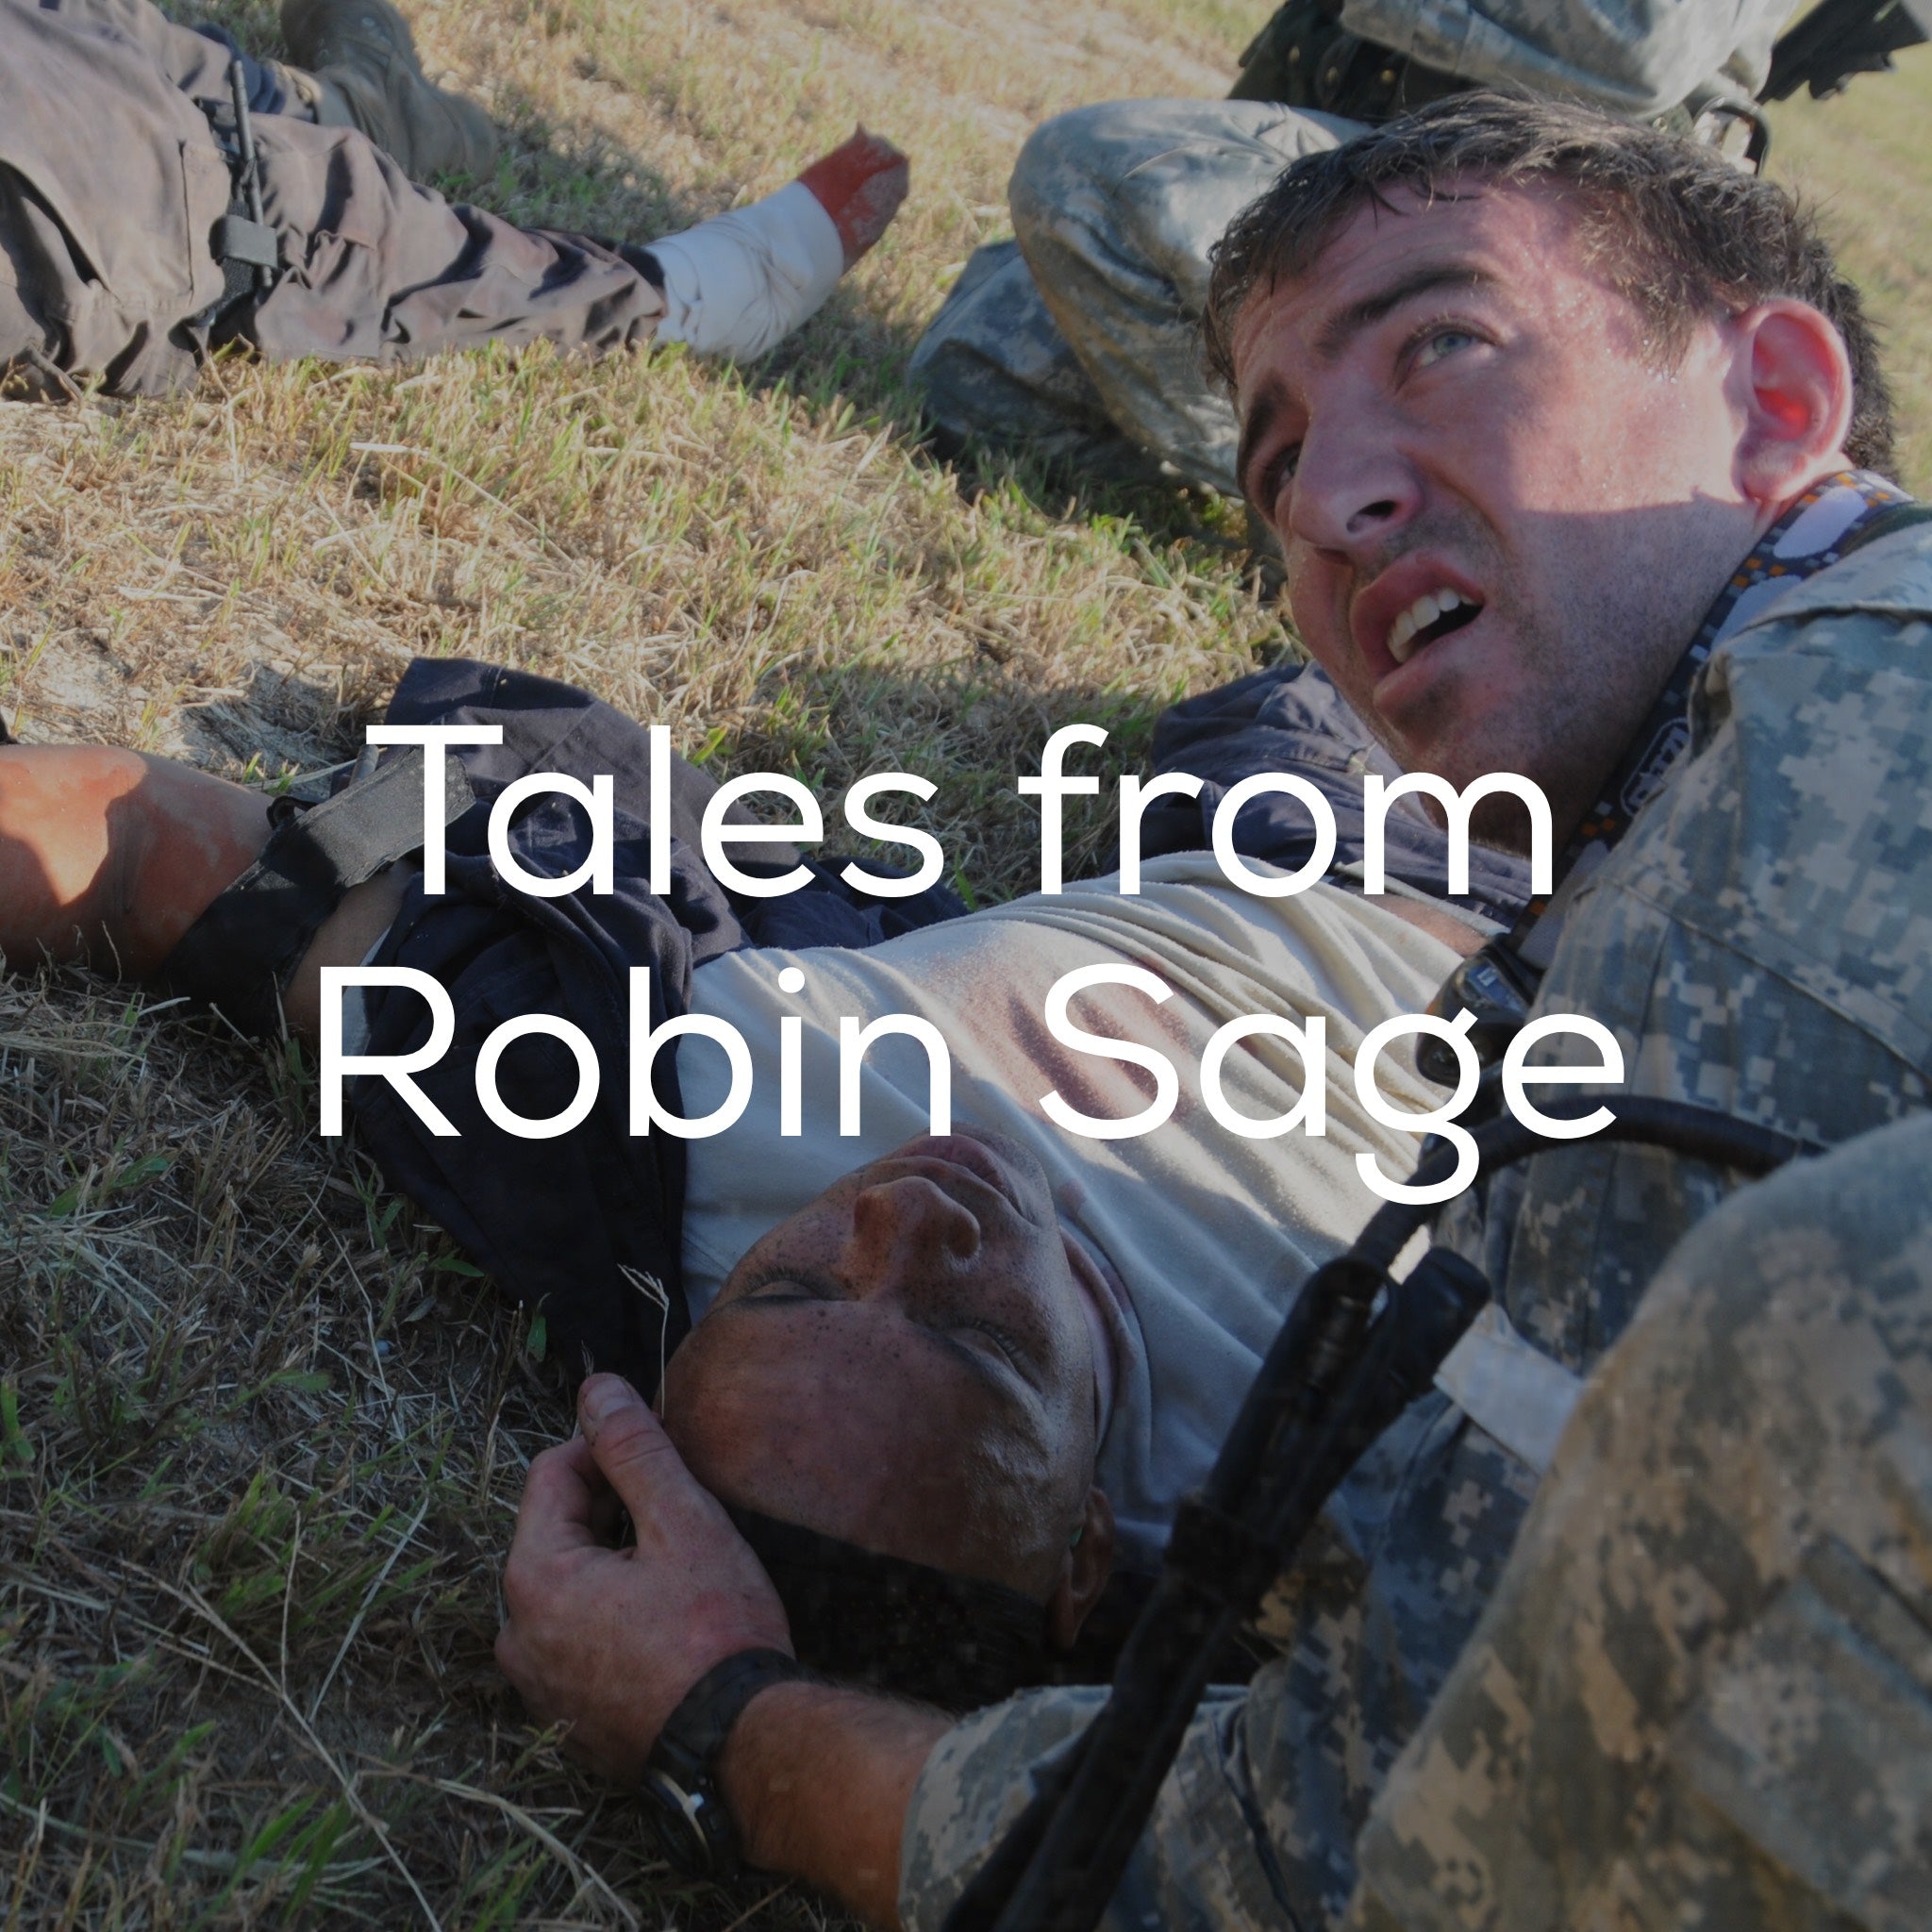 Tales from Robin Sage